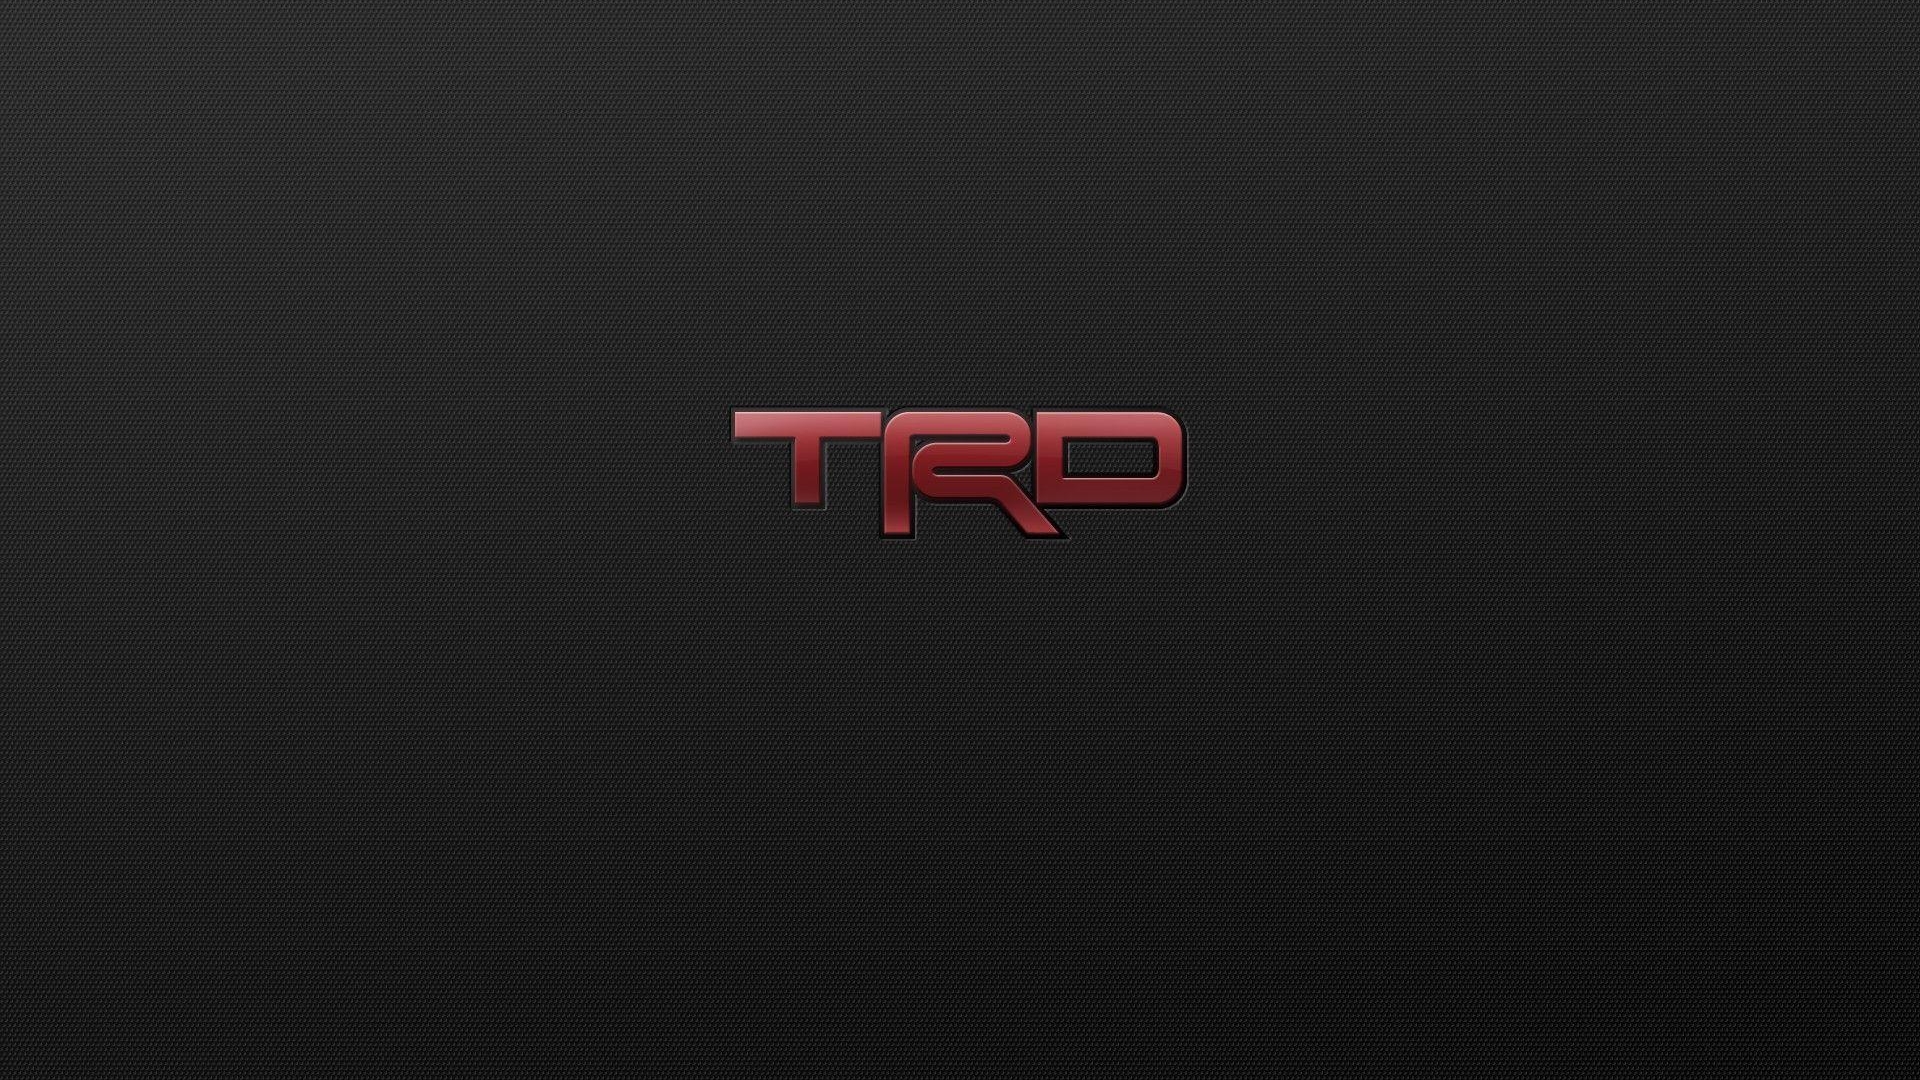 Free download download Image Gallery trd background [1920x1200] for